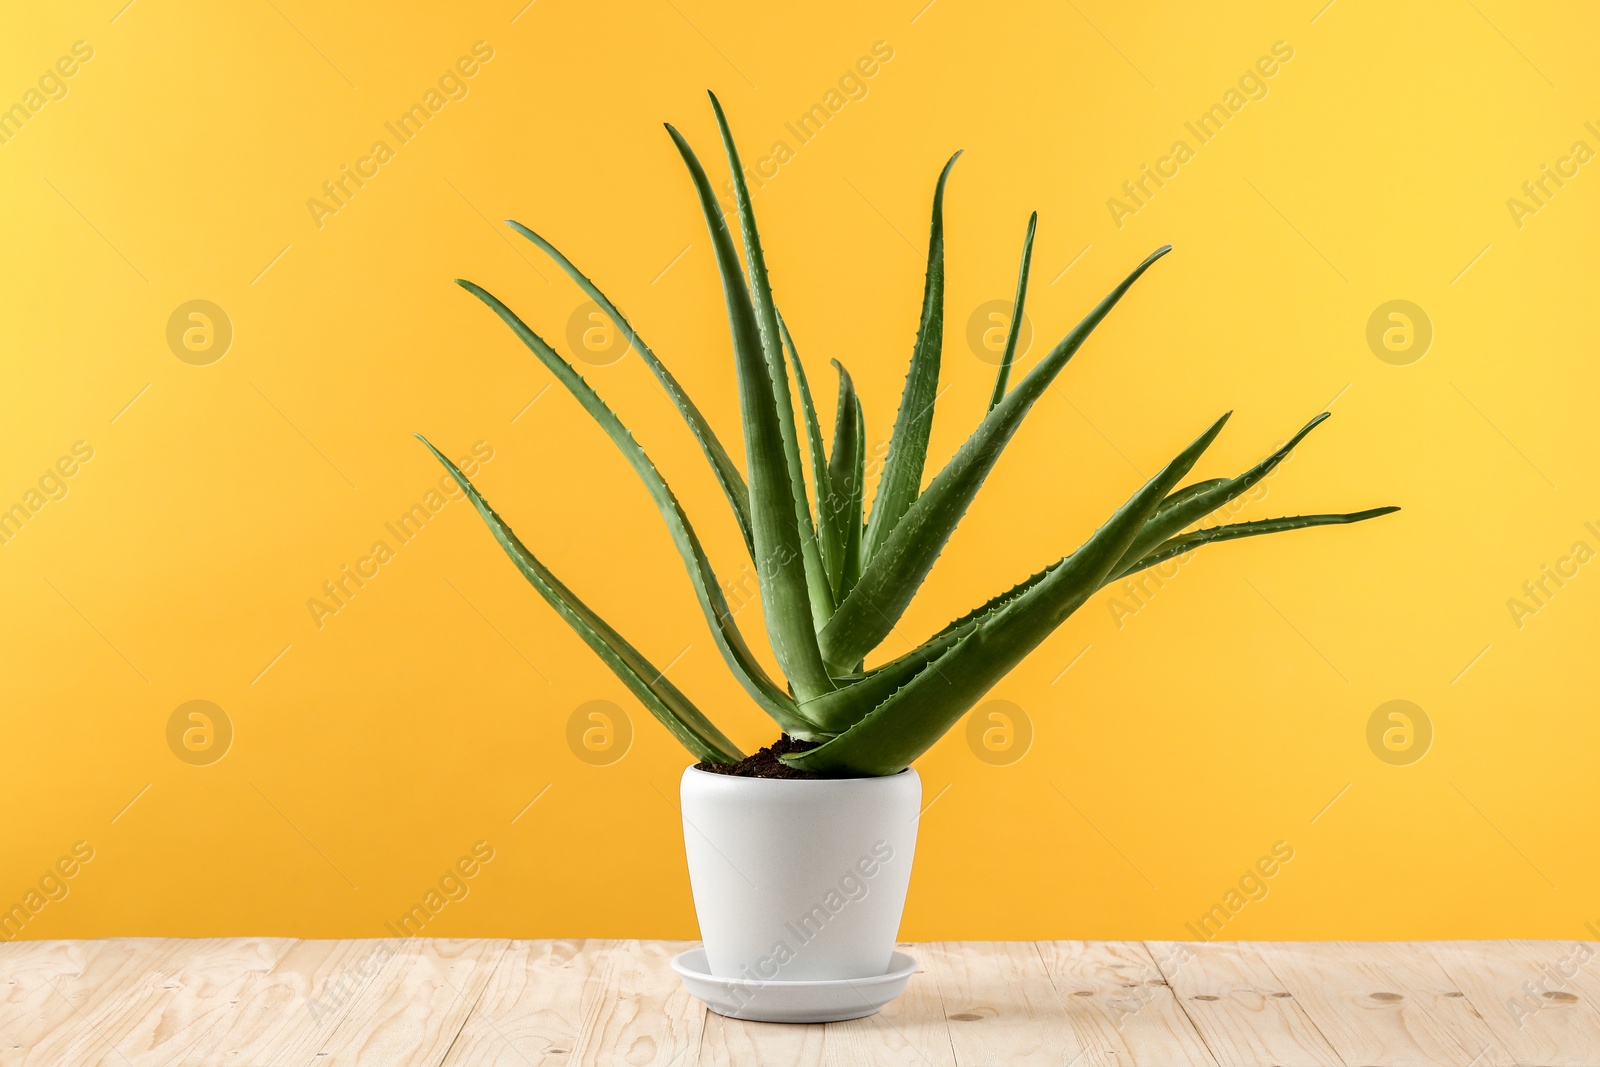 Photo of Green aloe vera in pot on wooden table against yellow background